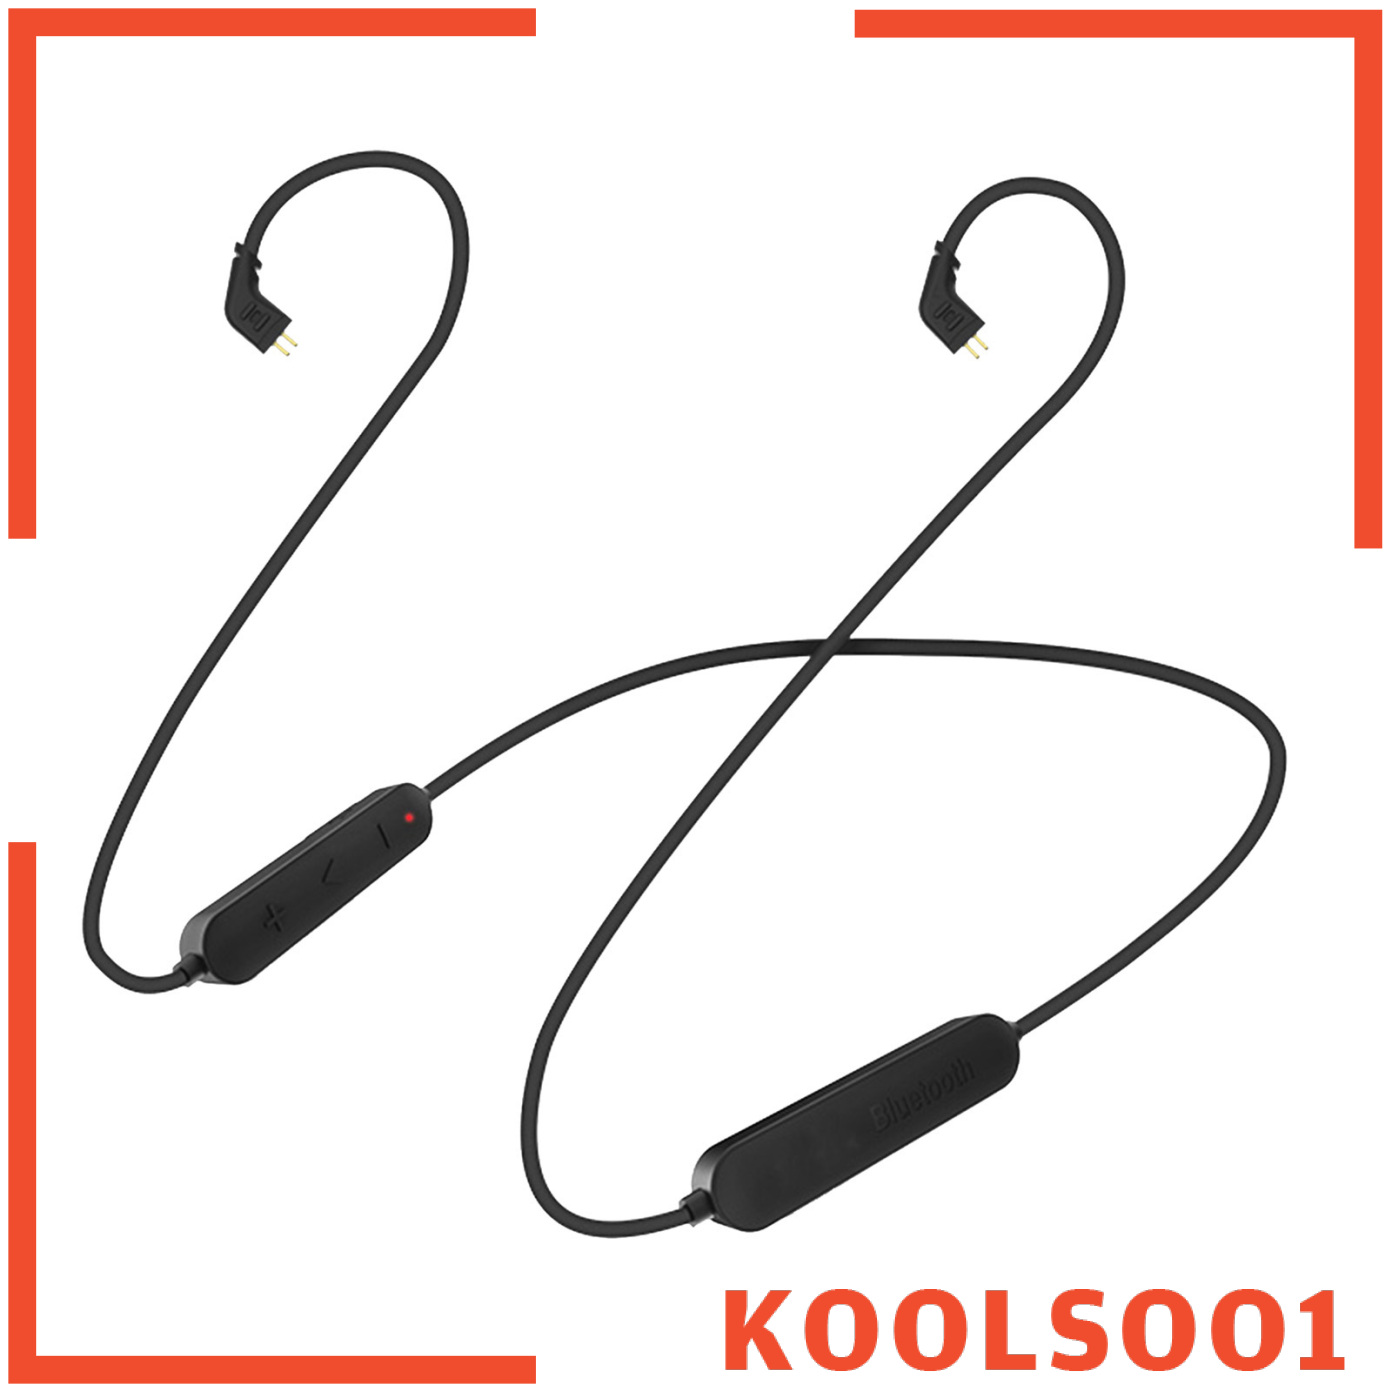 [KOOLSOO1]Bluetooth Module Wireless Upgrade Cable Replacement for KZ Earphones, HD Transmission